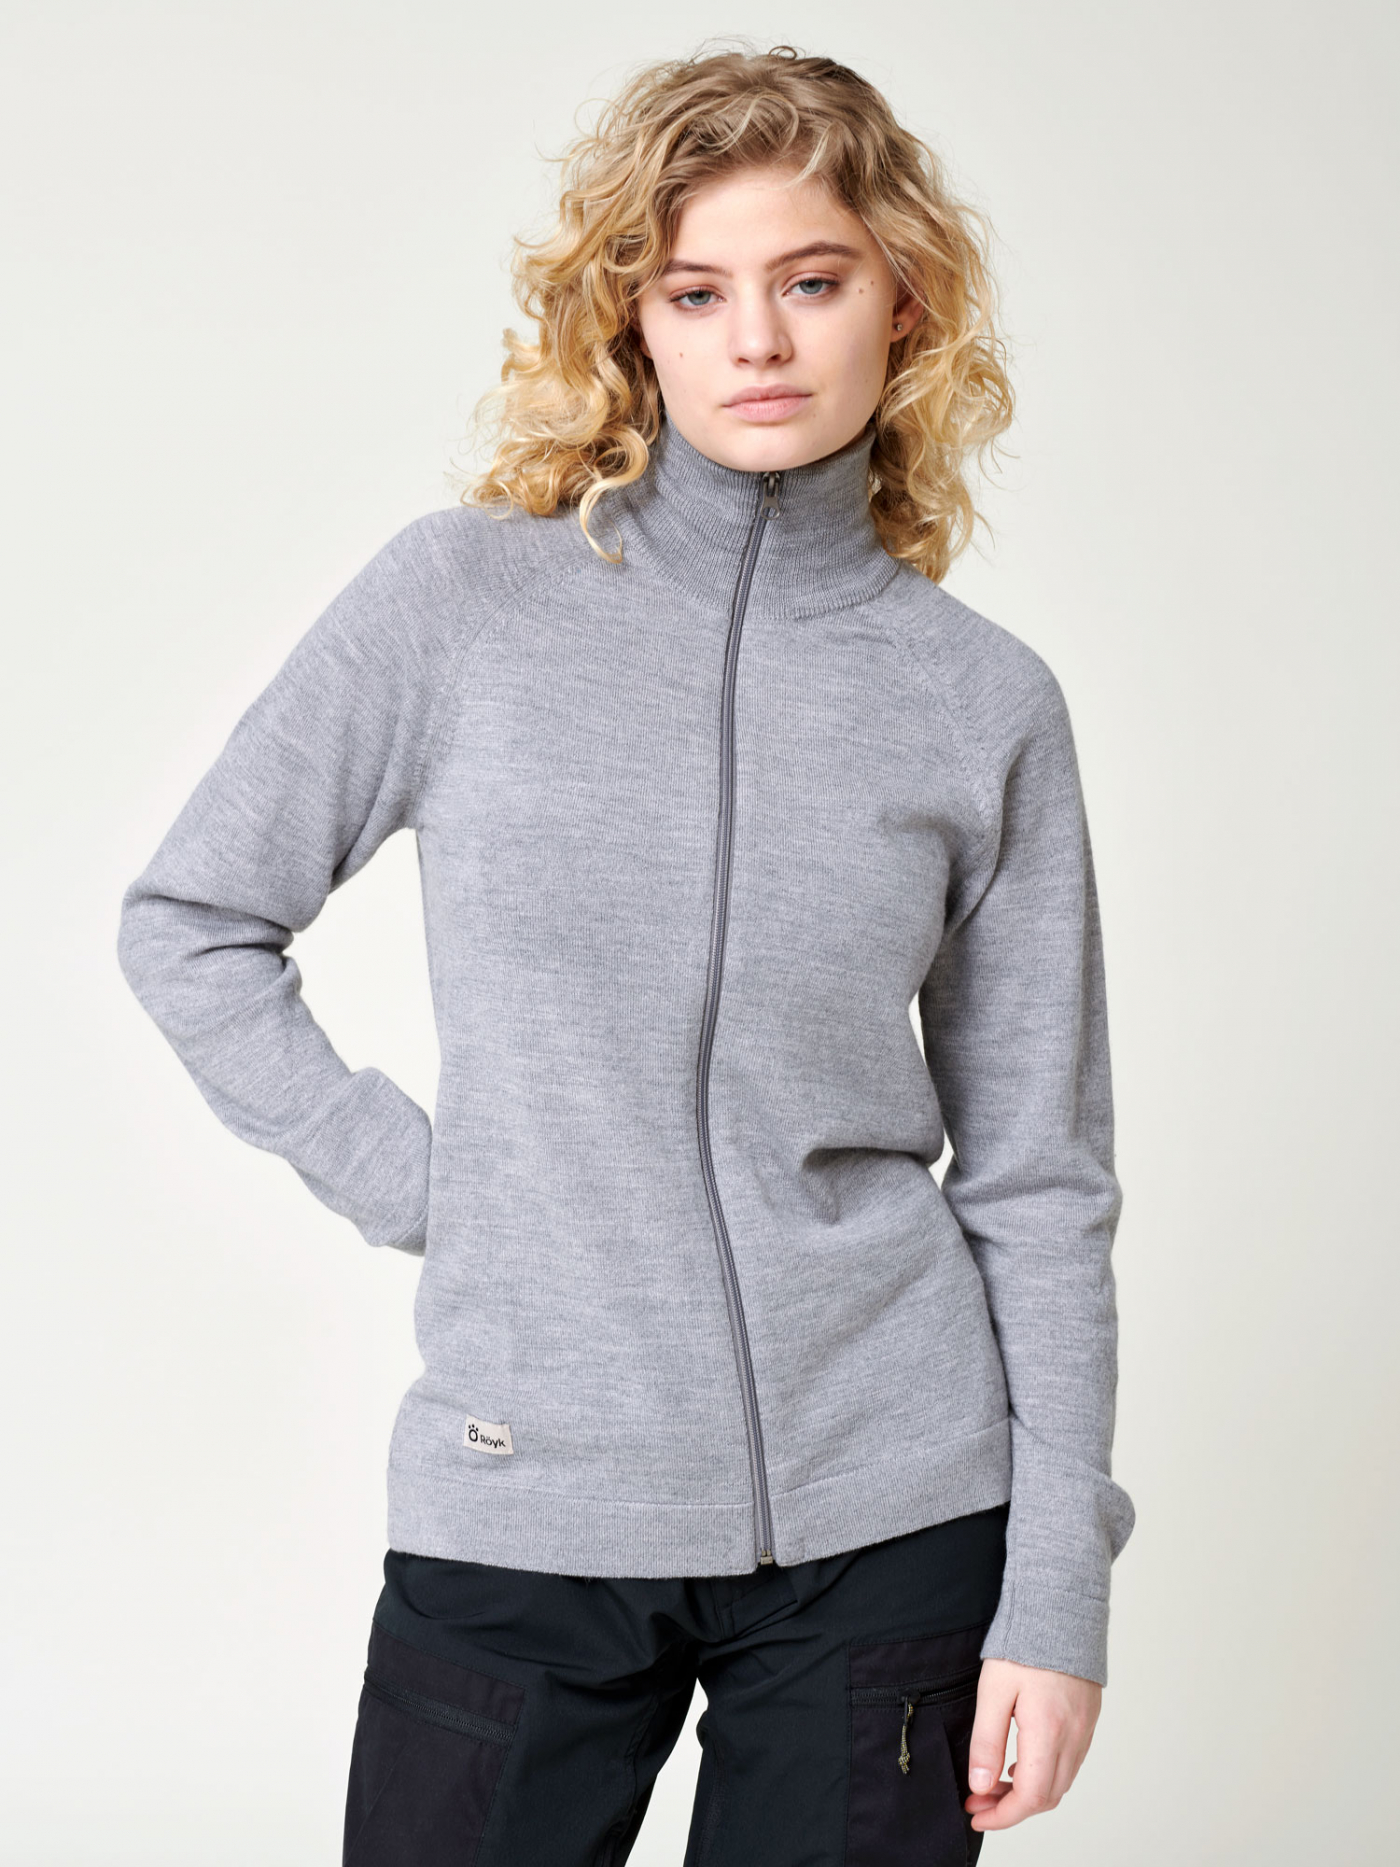 Denim & Co. Zip Front Fleece Jacket with Hood and Sherpa Lining - QVC.com